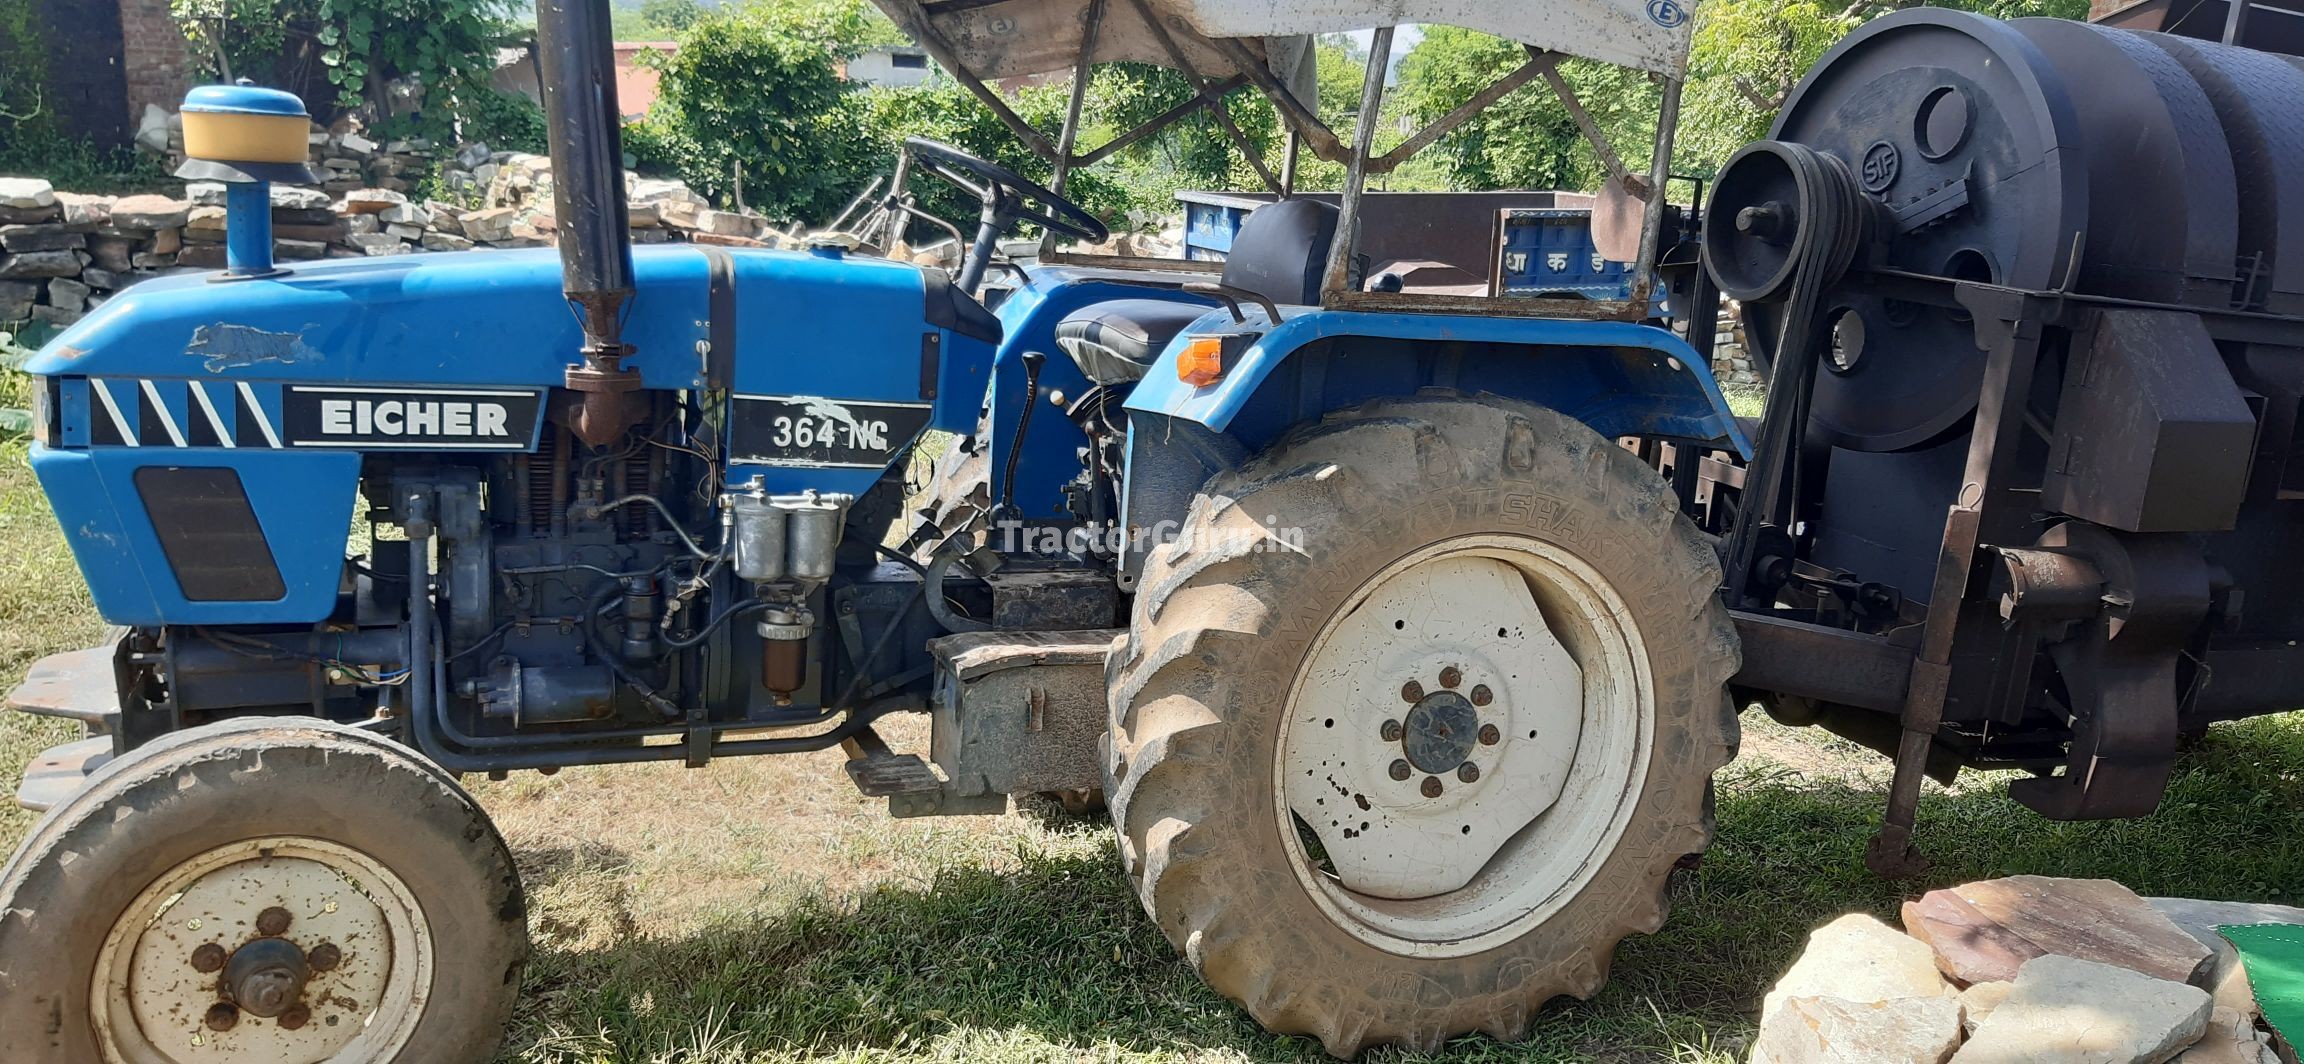 Get Second Hand Eicher 364  DI Tractor in Good Condition 